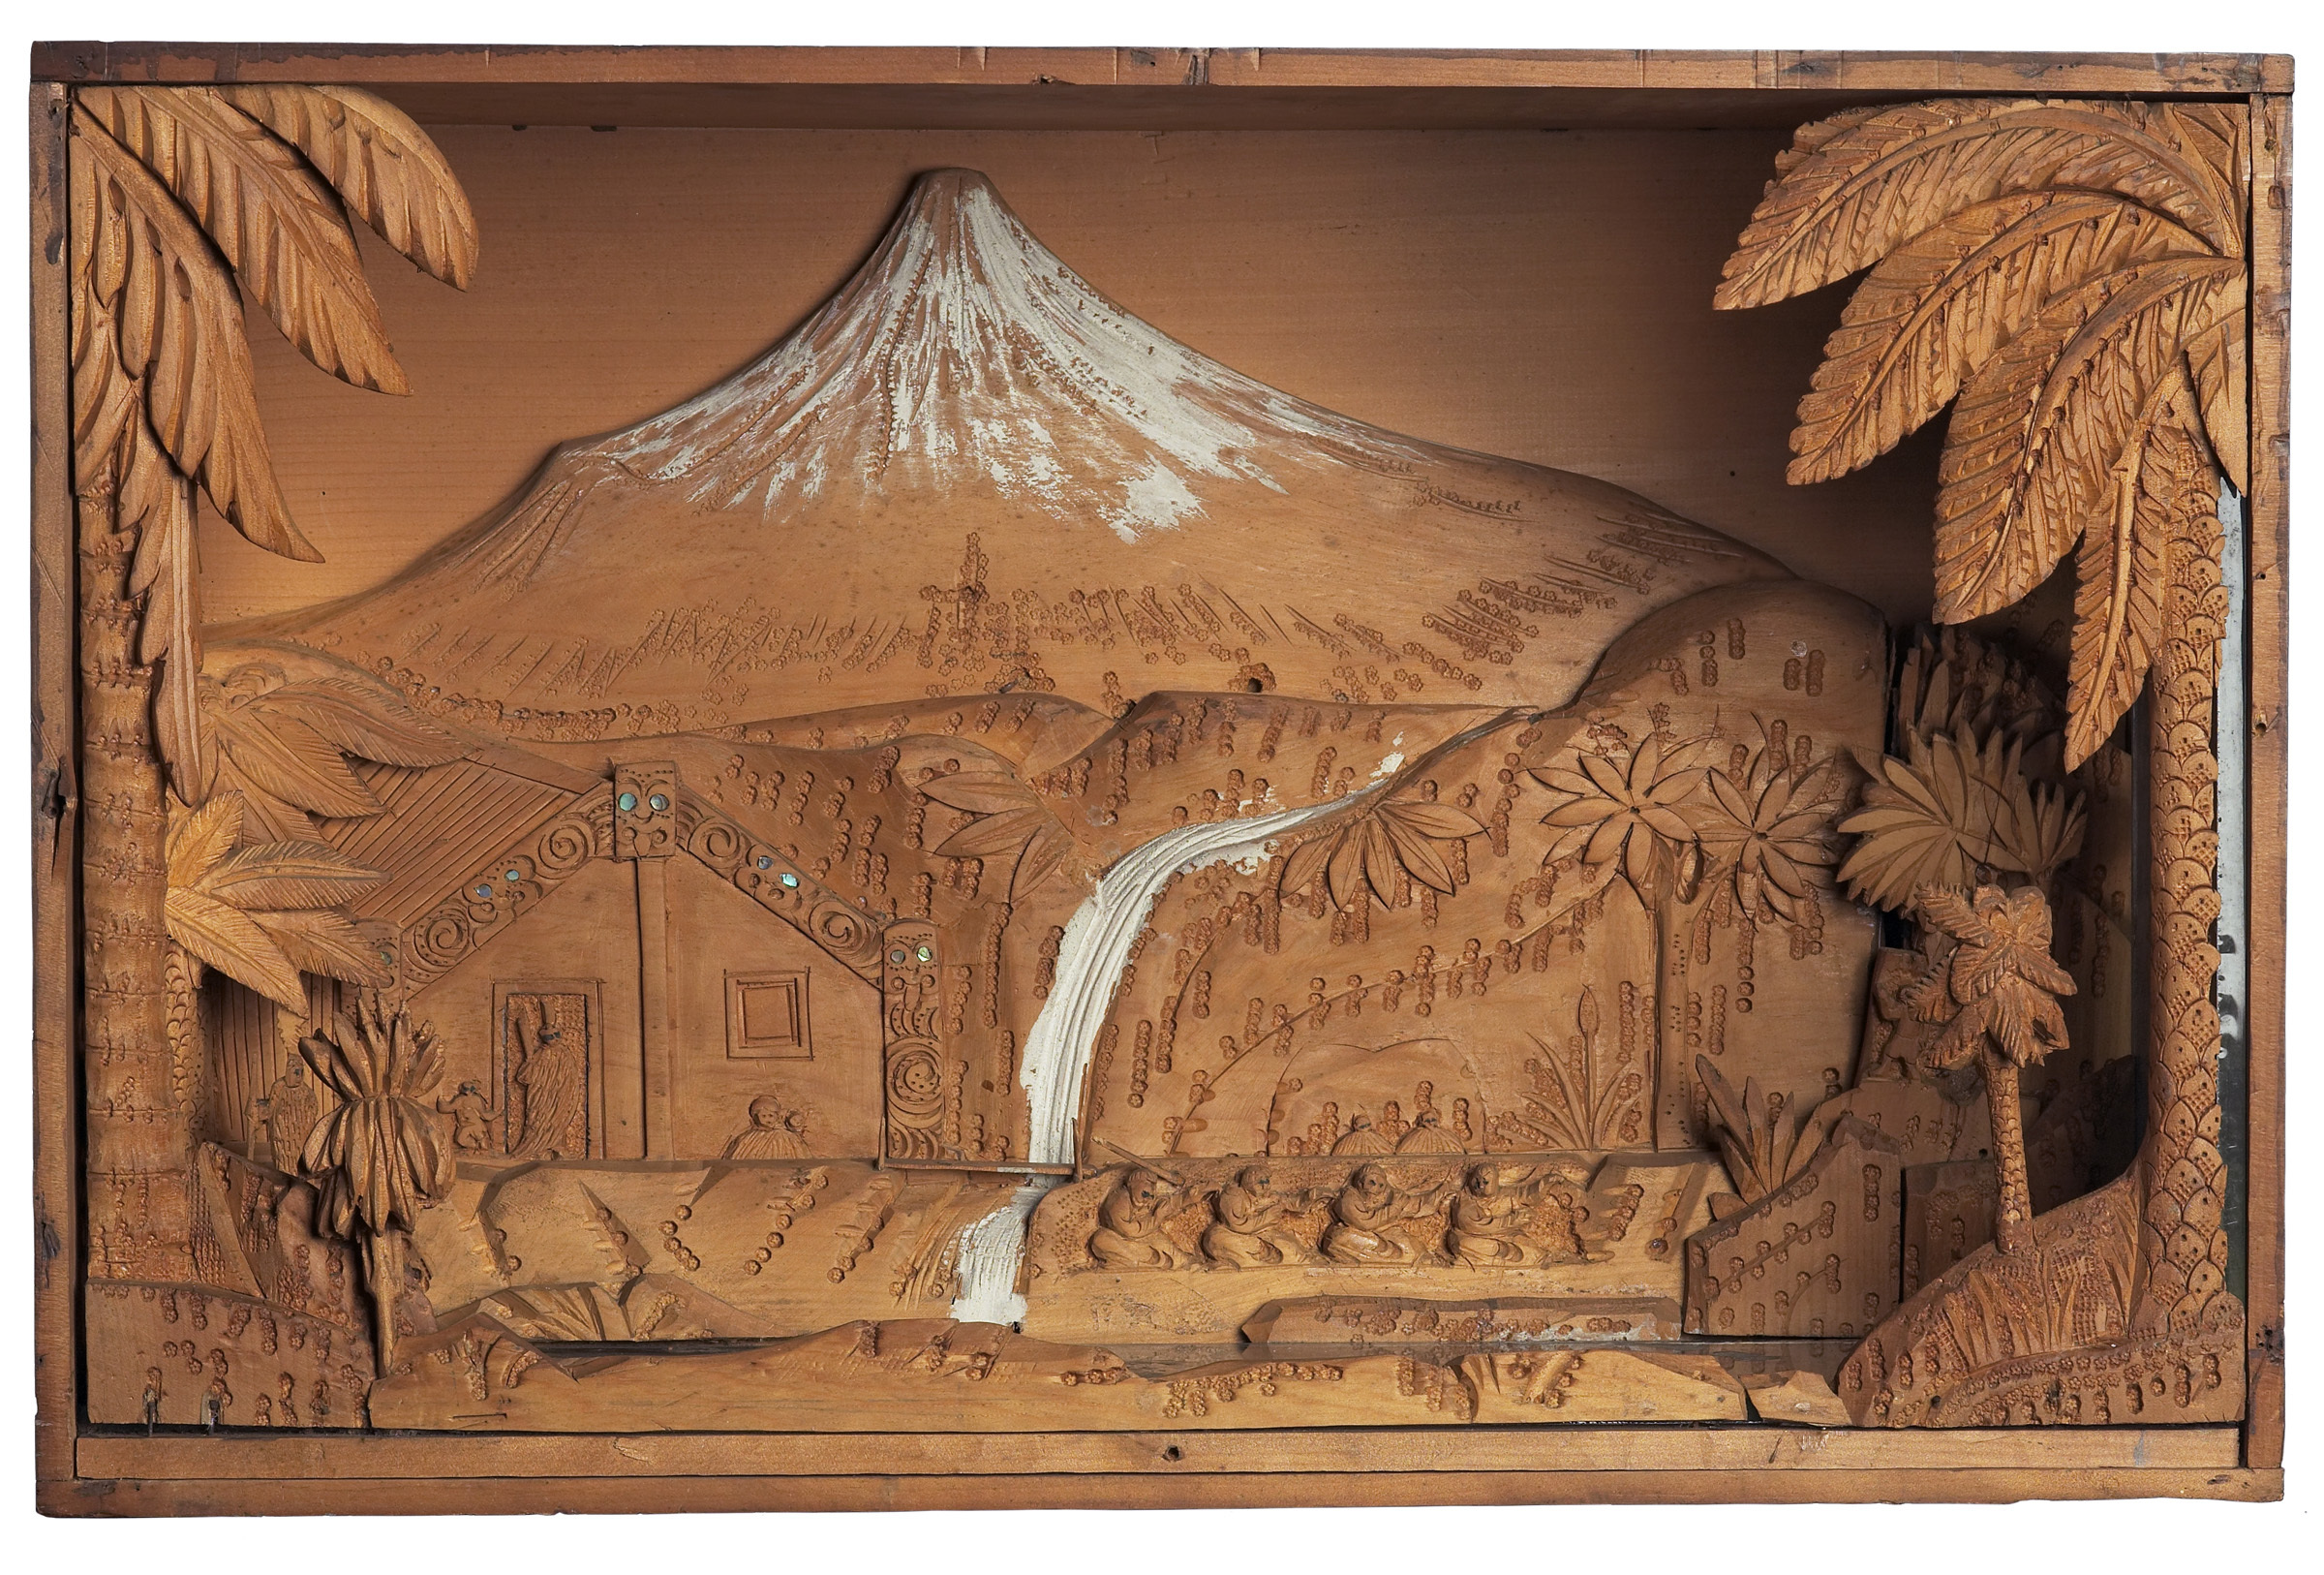 Carving, scene, circa 1905, Wellington, by William Gee. Gift of Mrs G. M. Williams, 1965. CC BY-NC-ND licence. Te Papa (GH007416)